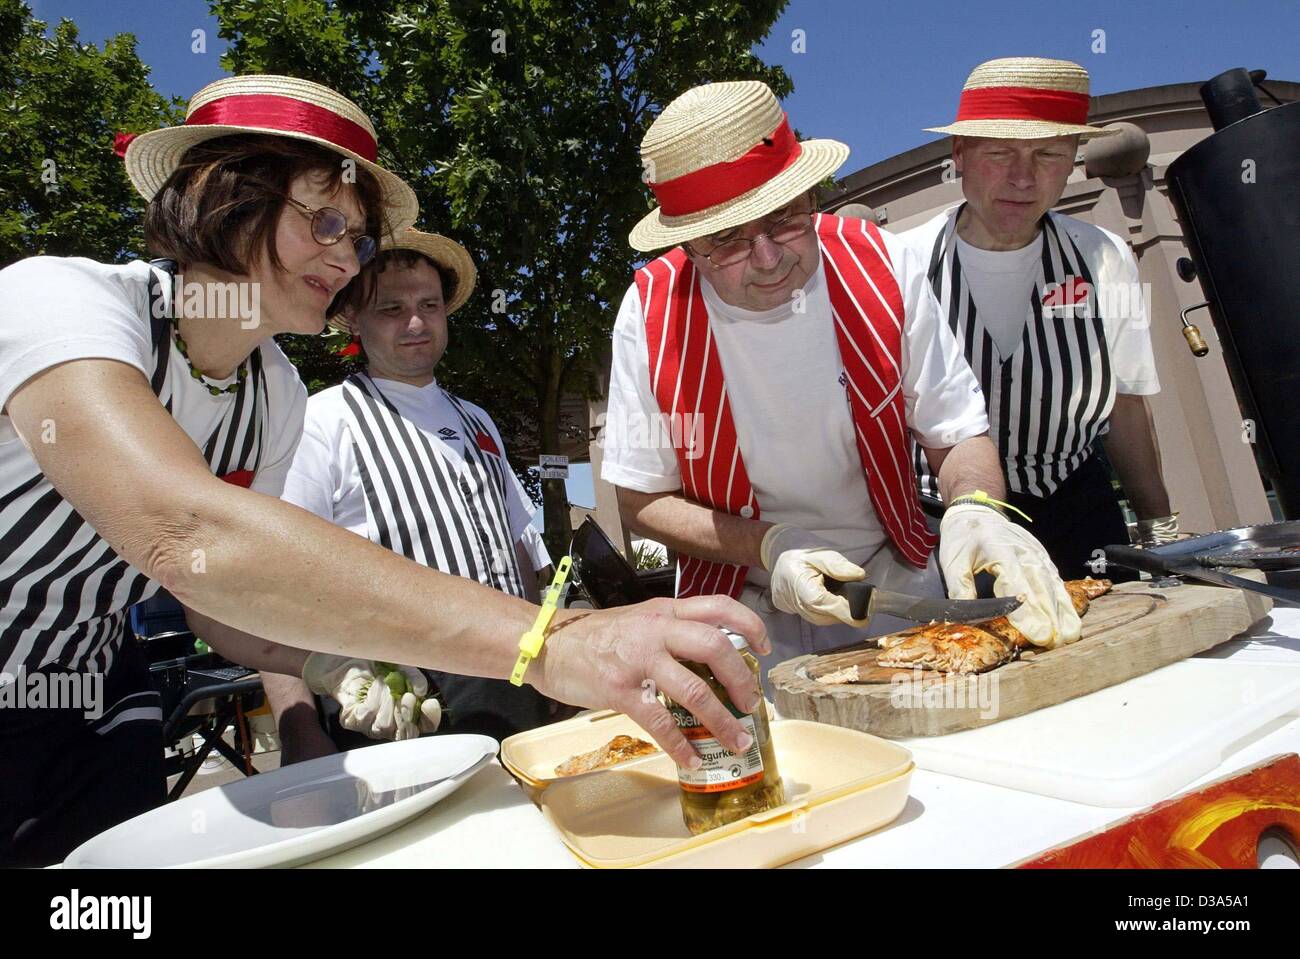 (dpa) - The team 'The 5 Swabians' from Tuebingen prepare salmon as a main course at the German Barbecue Championships in Pirmasens, Germany, 2 June 2002. Lore Wizemann (L-R), Tommaso Cremona, Siegfried Kammueller and Horst Wizemann were able zo defend their title in this year's championships. Stock Photo